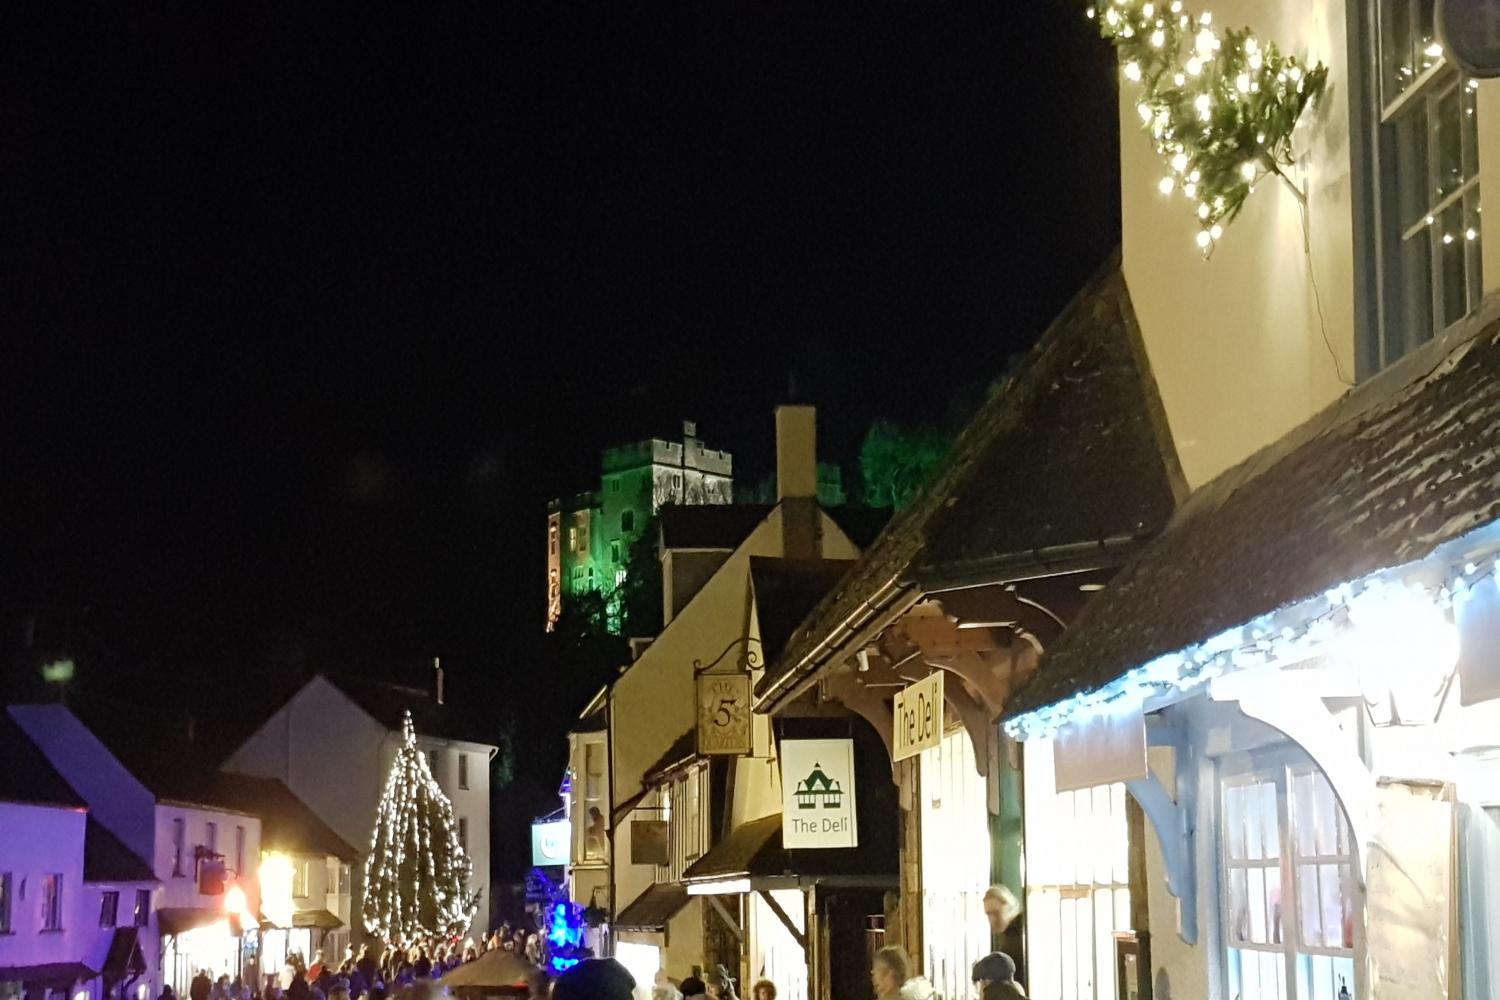 Dunster by candlelight